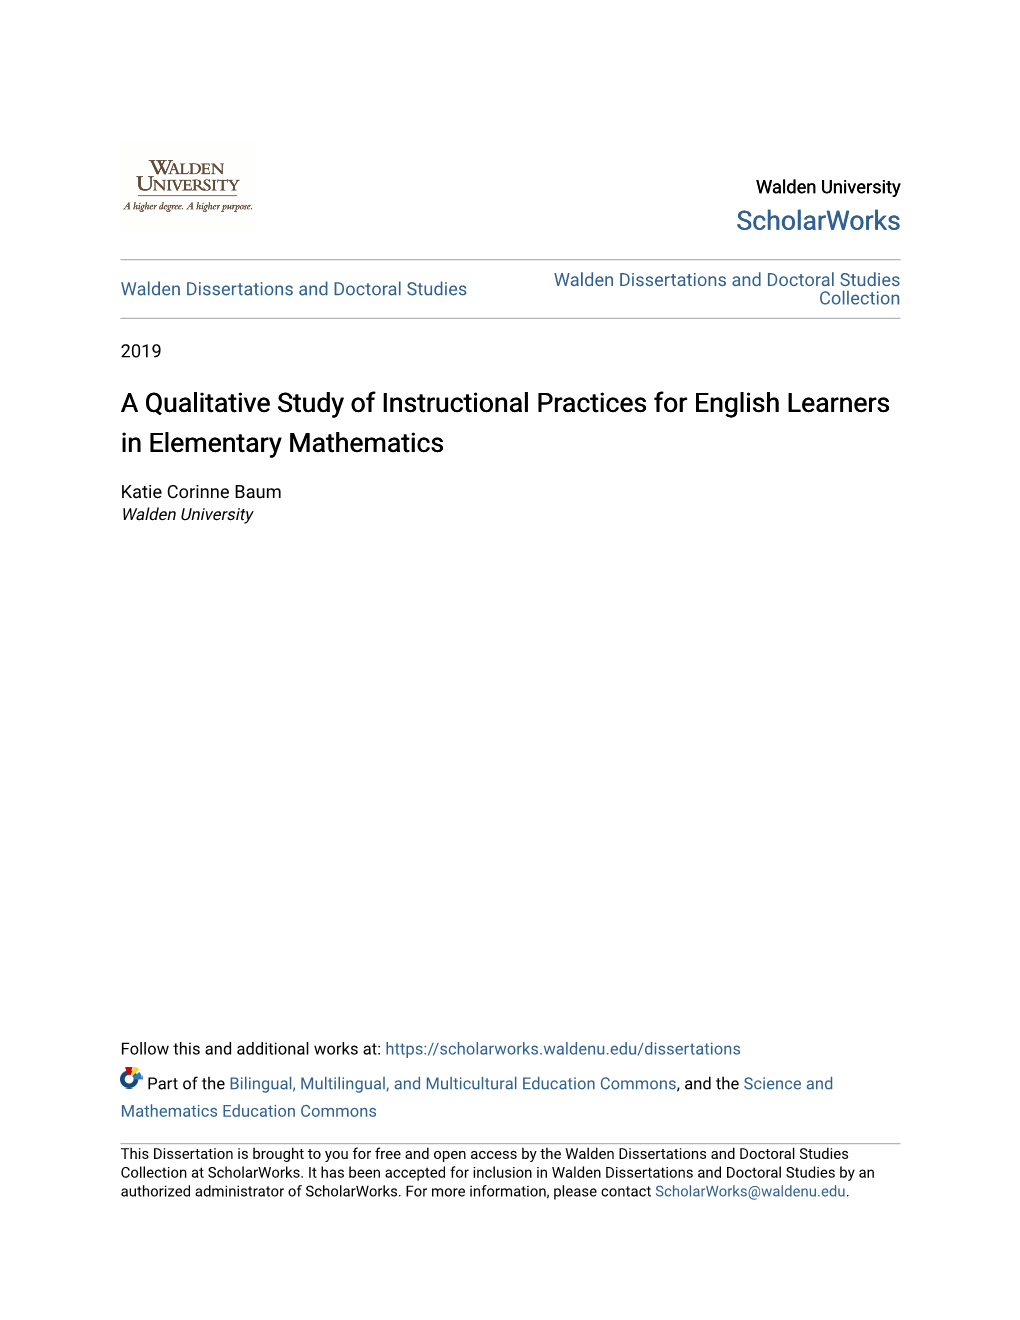 A Qualitative Study of Instructional Practices for English Learners in Elementary Mathematics